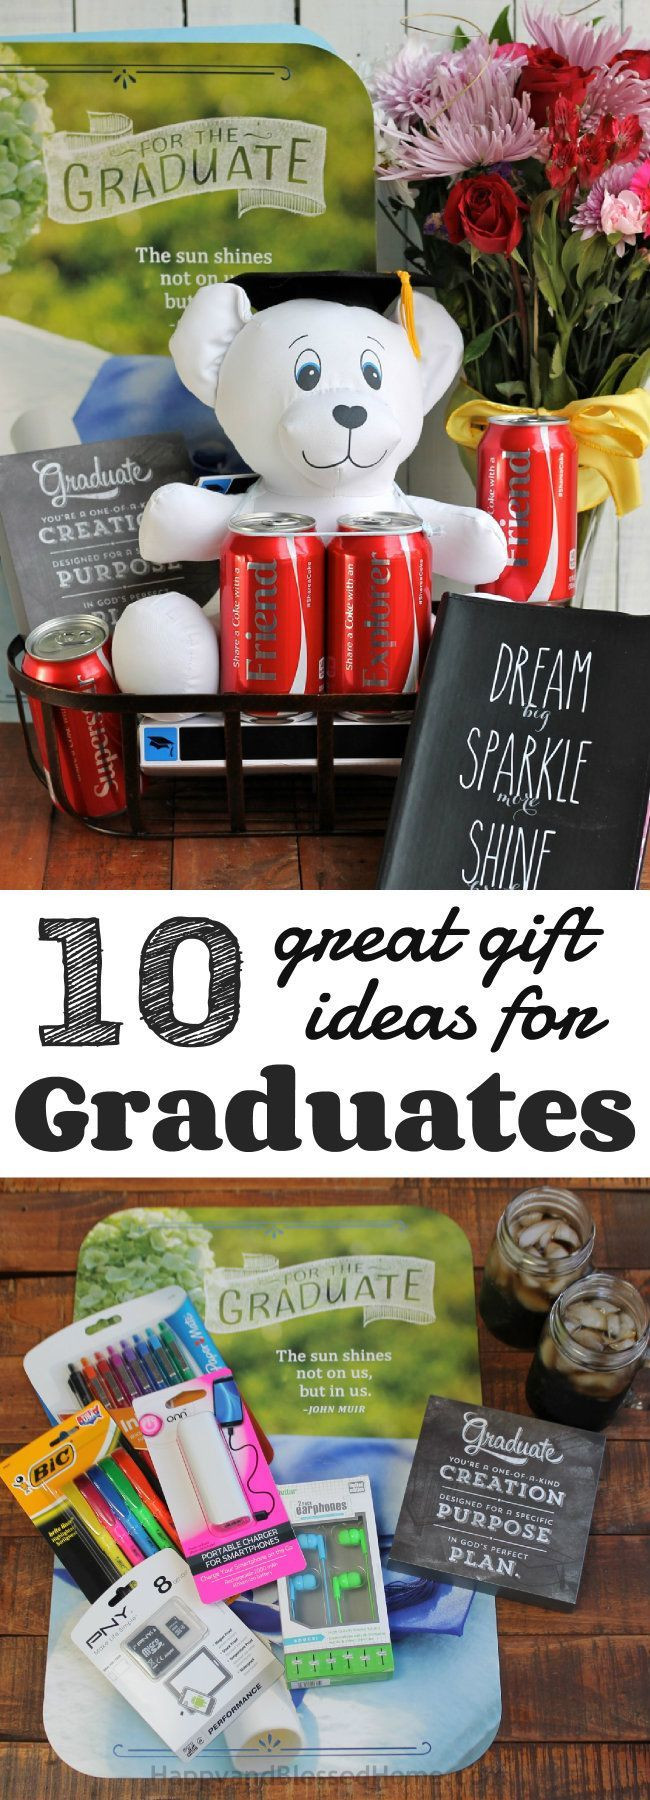 Special Graduation Gift Ideas
 10 Great Gift Ideas for Graduates